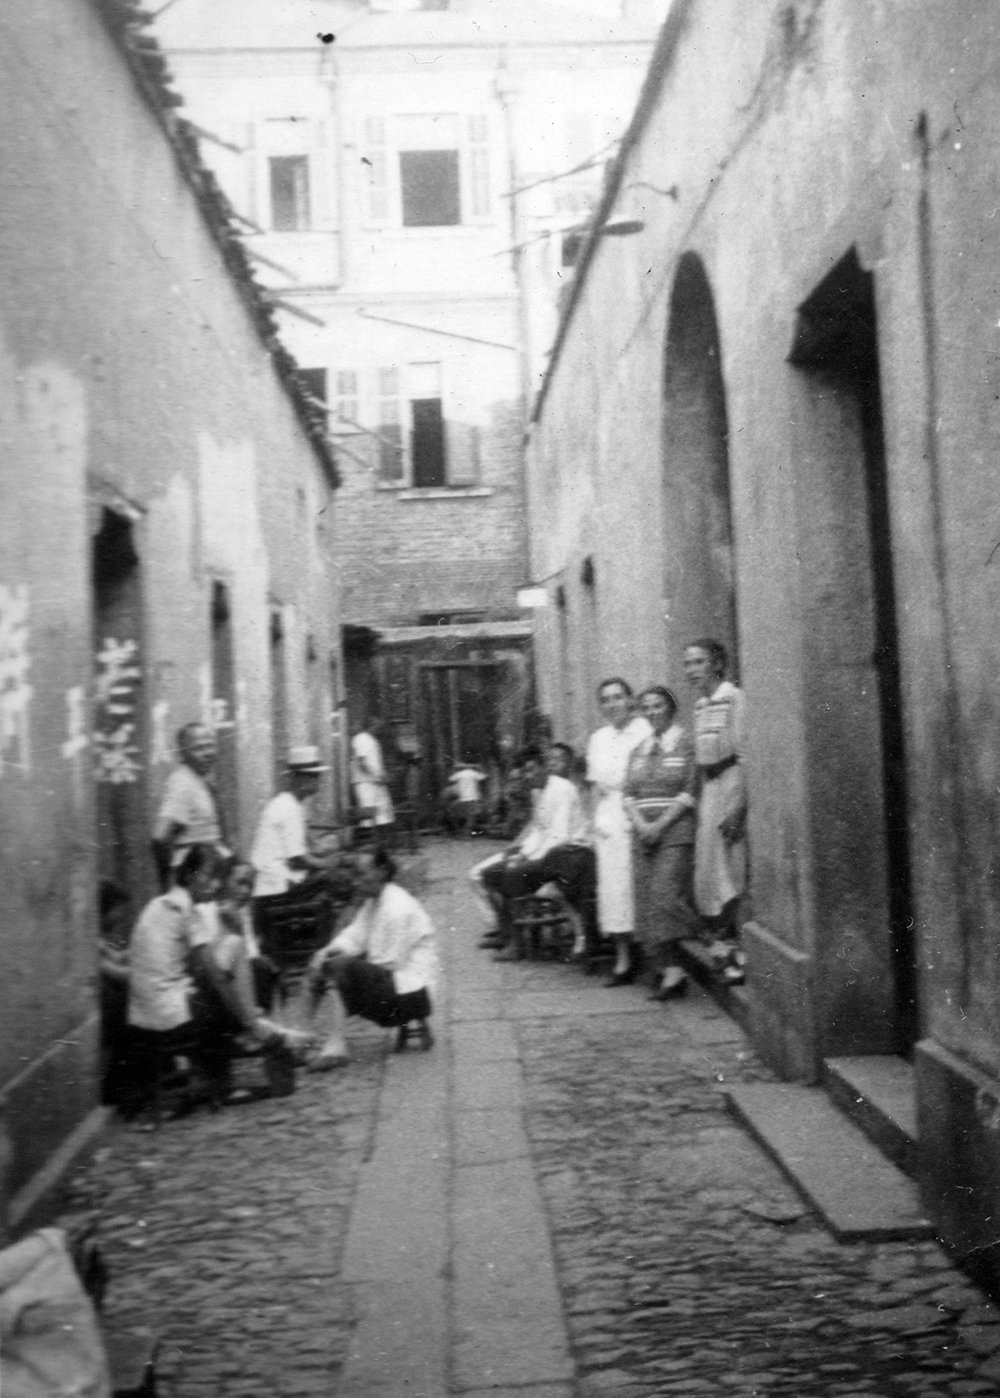 An old photo of men and women standing together in a cobblestone alley, surrounded by buildings with Chinese characters.